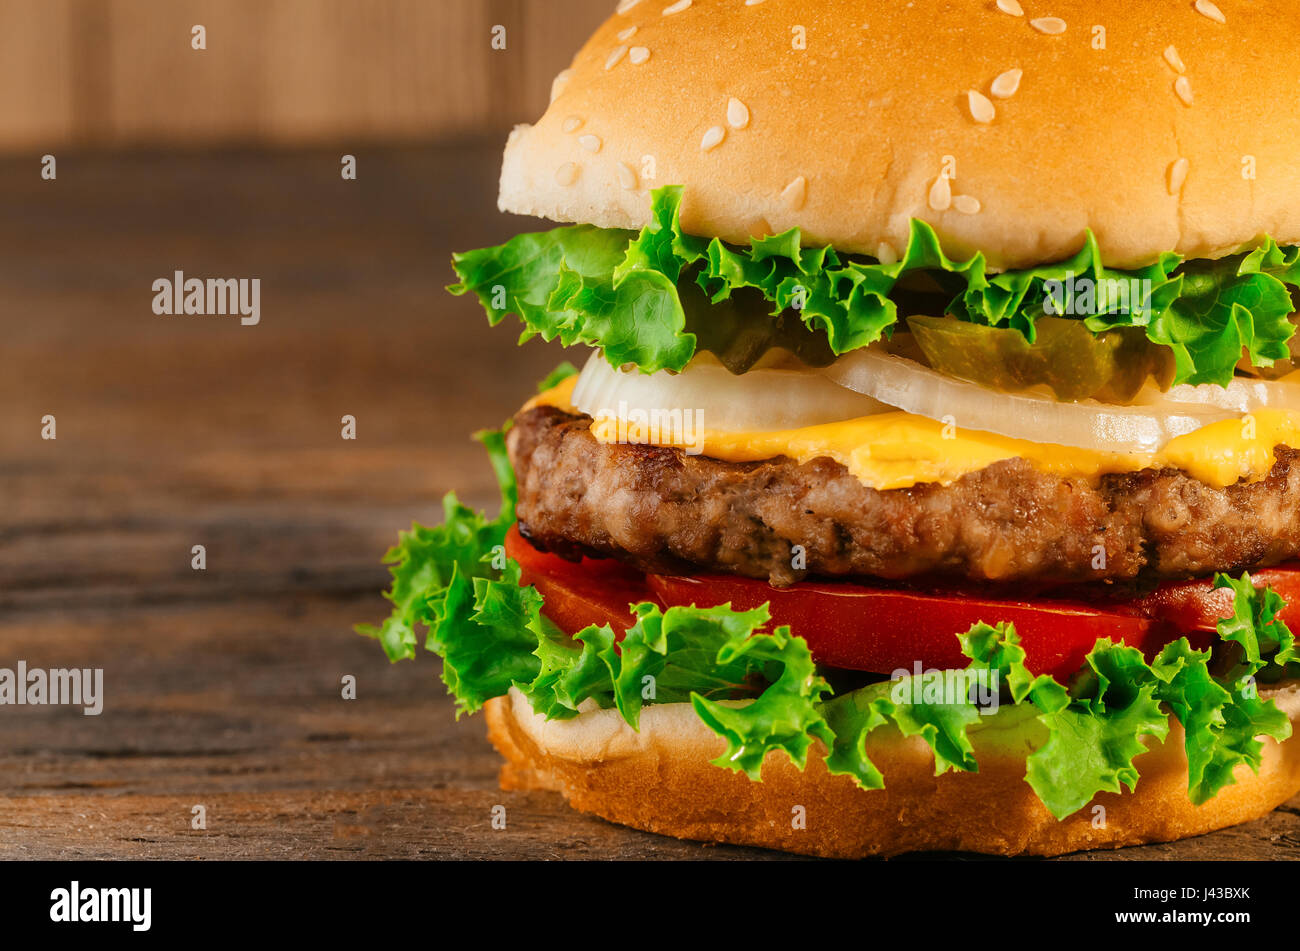 Homemade hamburger with fresh vegetables Classic deluxe cheeseburger Stock Photo